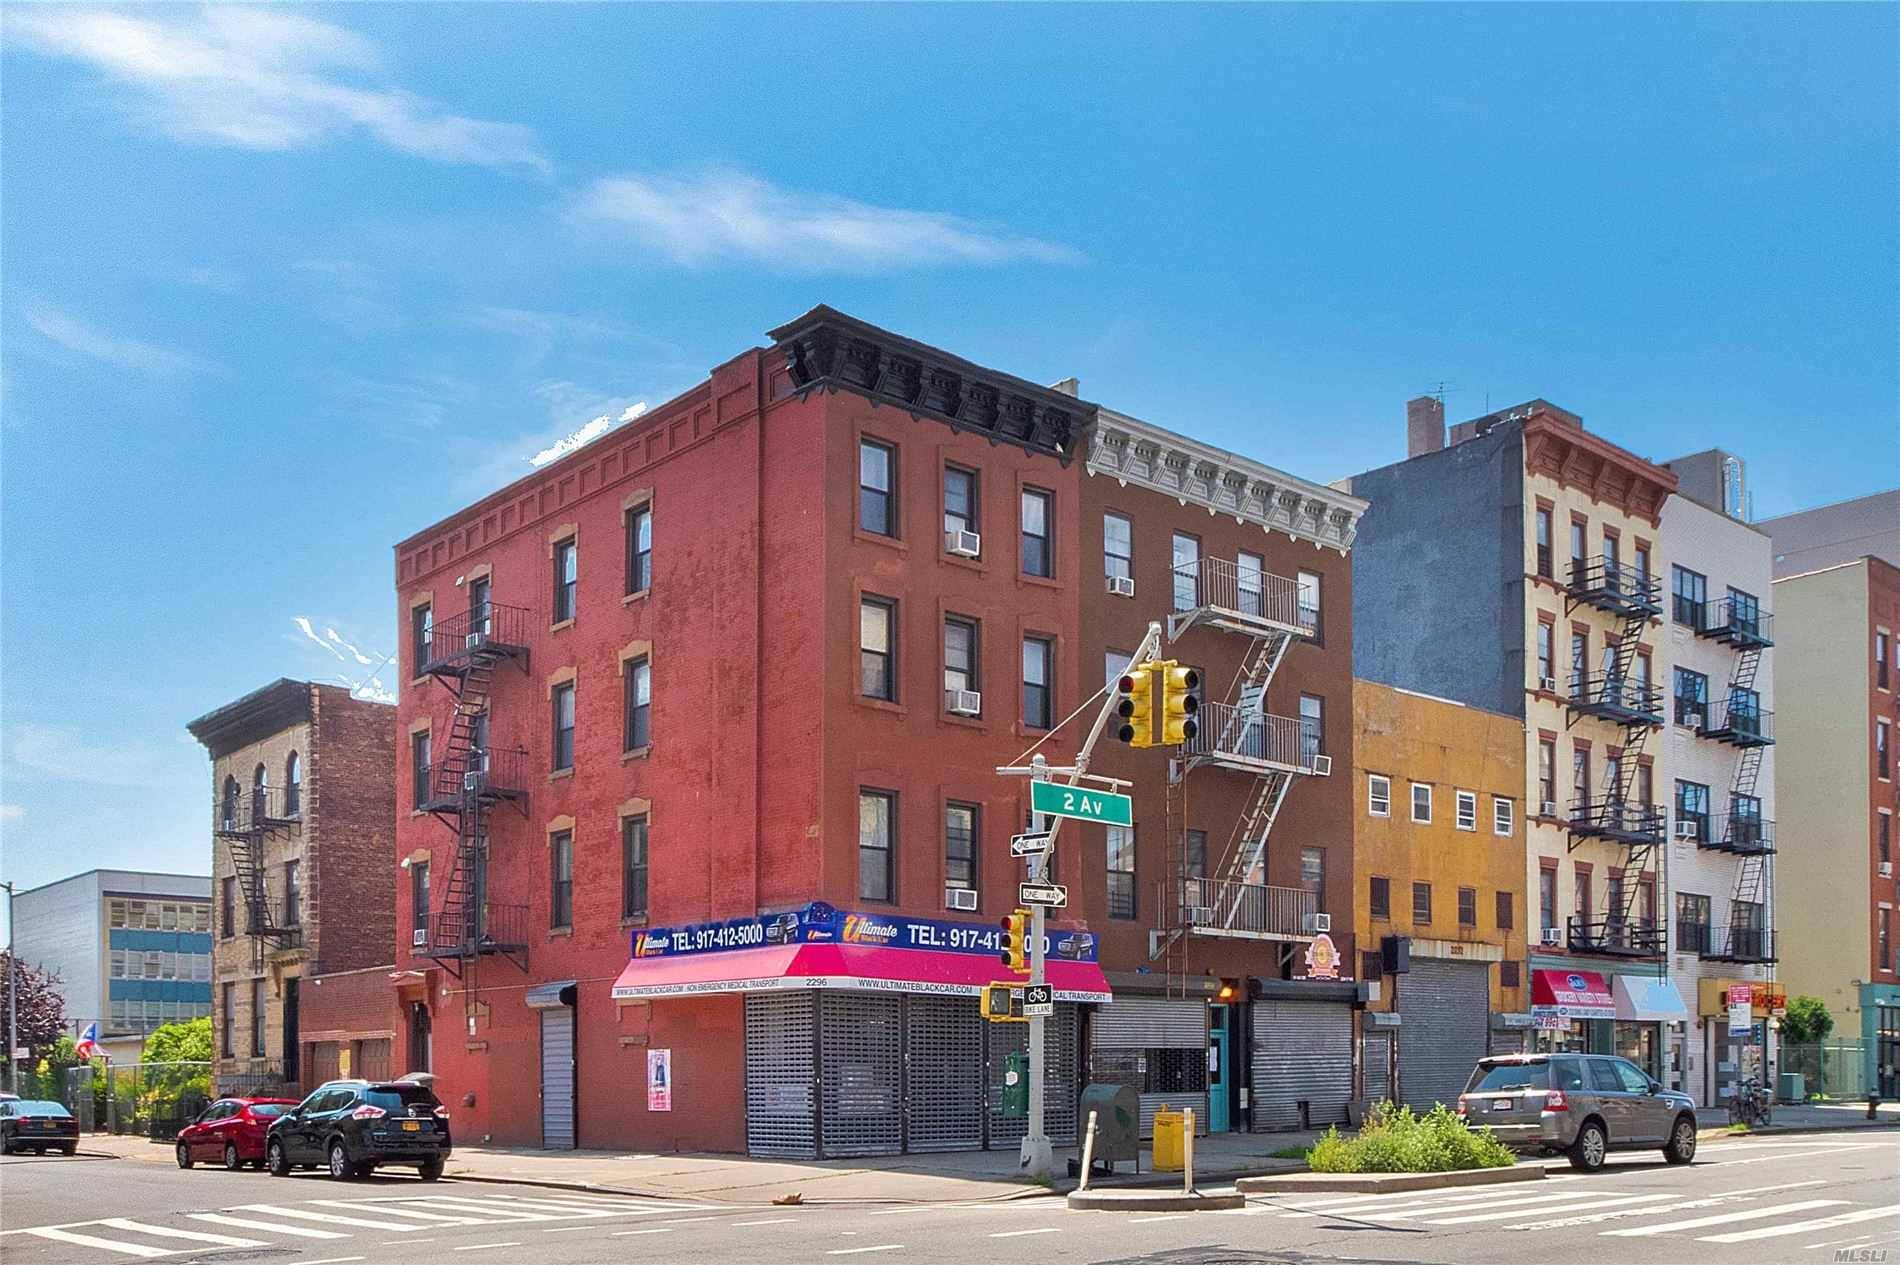 Compass is pleased to present our exclusive listing at 2296 Second Ave in East Harlem.